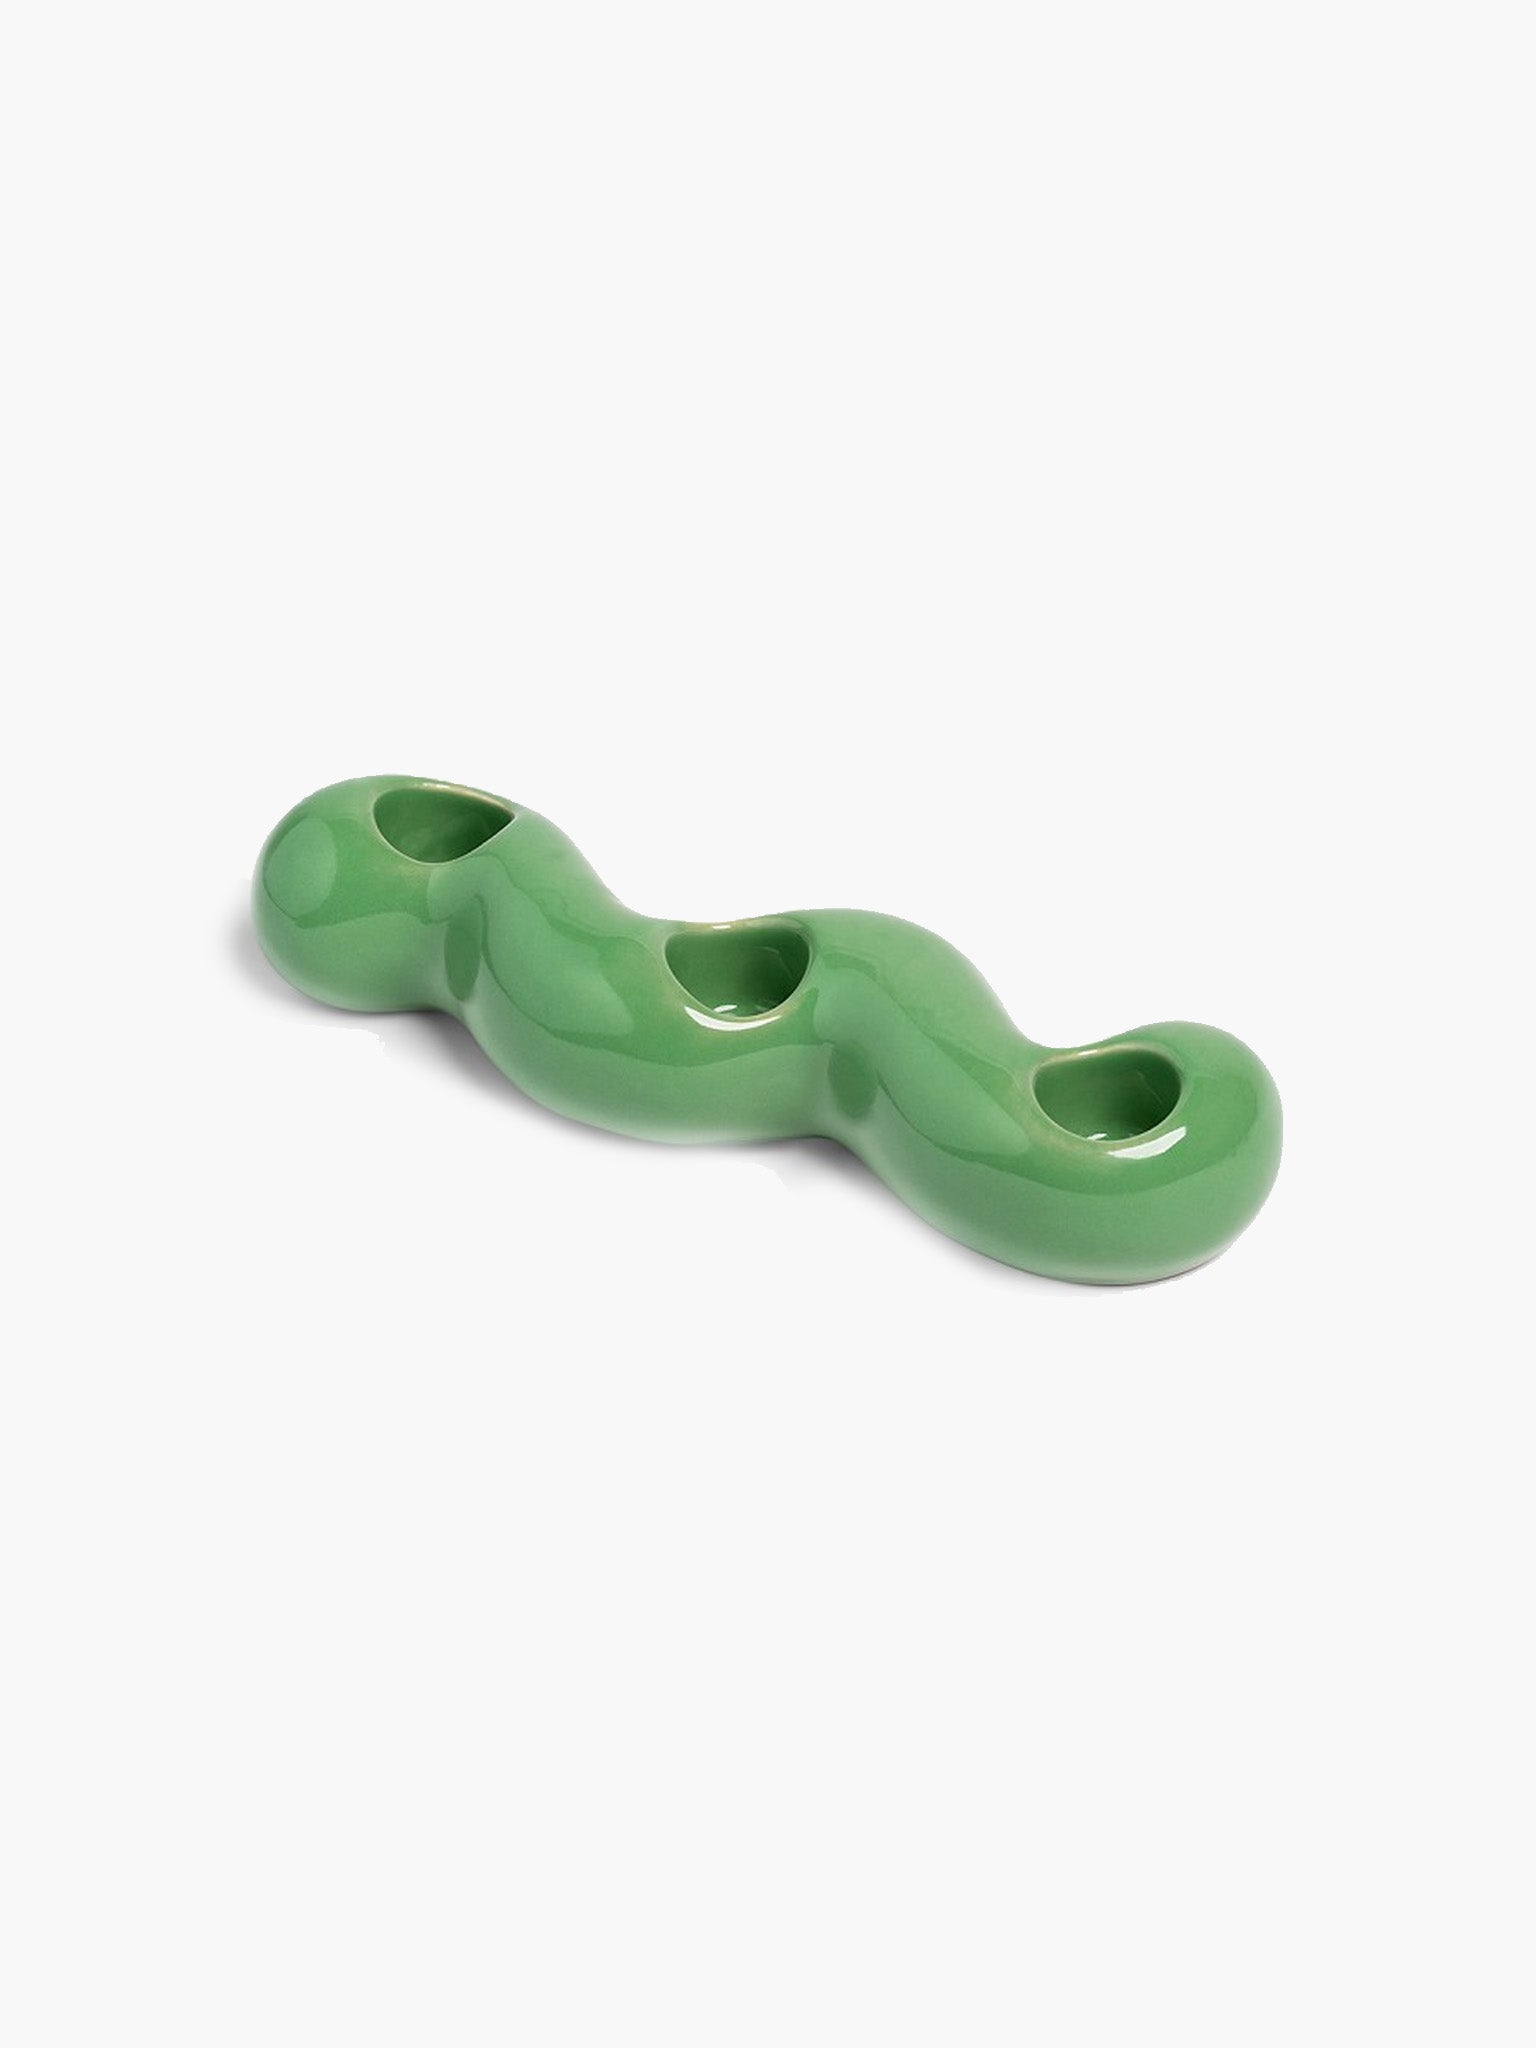 Scribble Candle Holder - Green